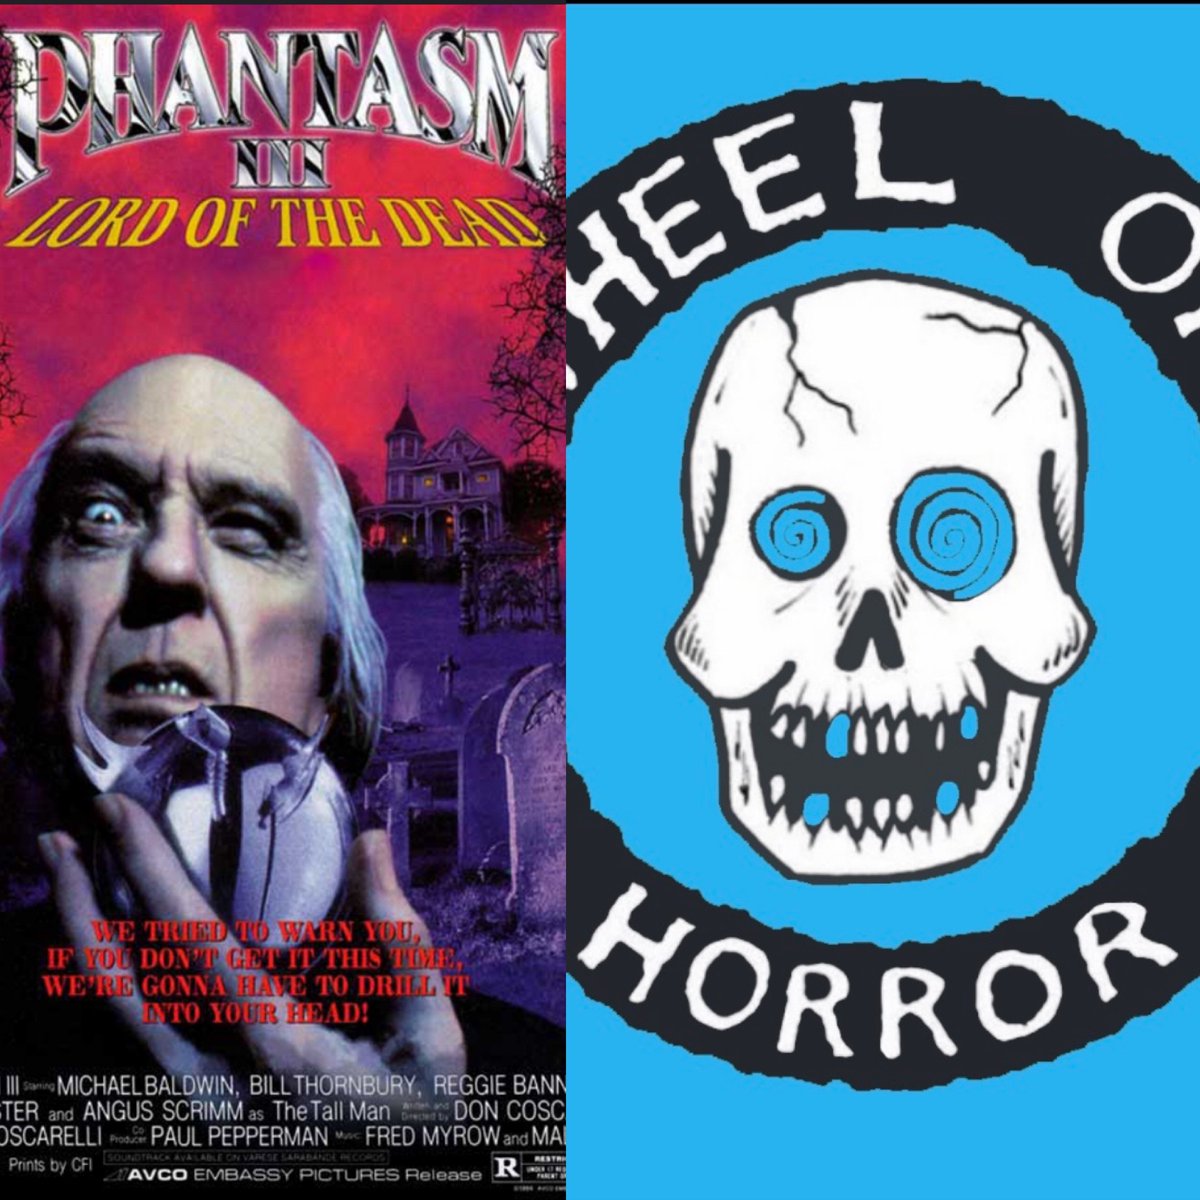 Who does love those silver flying balls? Today we are talking Phantasm 3: Lord of the Dead. The 1994 straight to VHS classic. With the original Mike returning, the Tall Man getting even taller, and more silver balls than anyone knows what to do with. It's Phantasm baby. Enjoy!